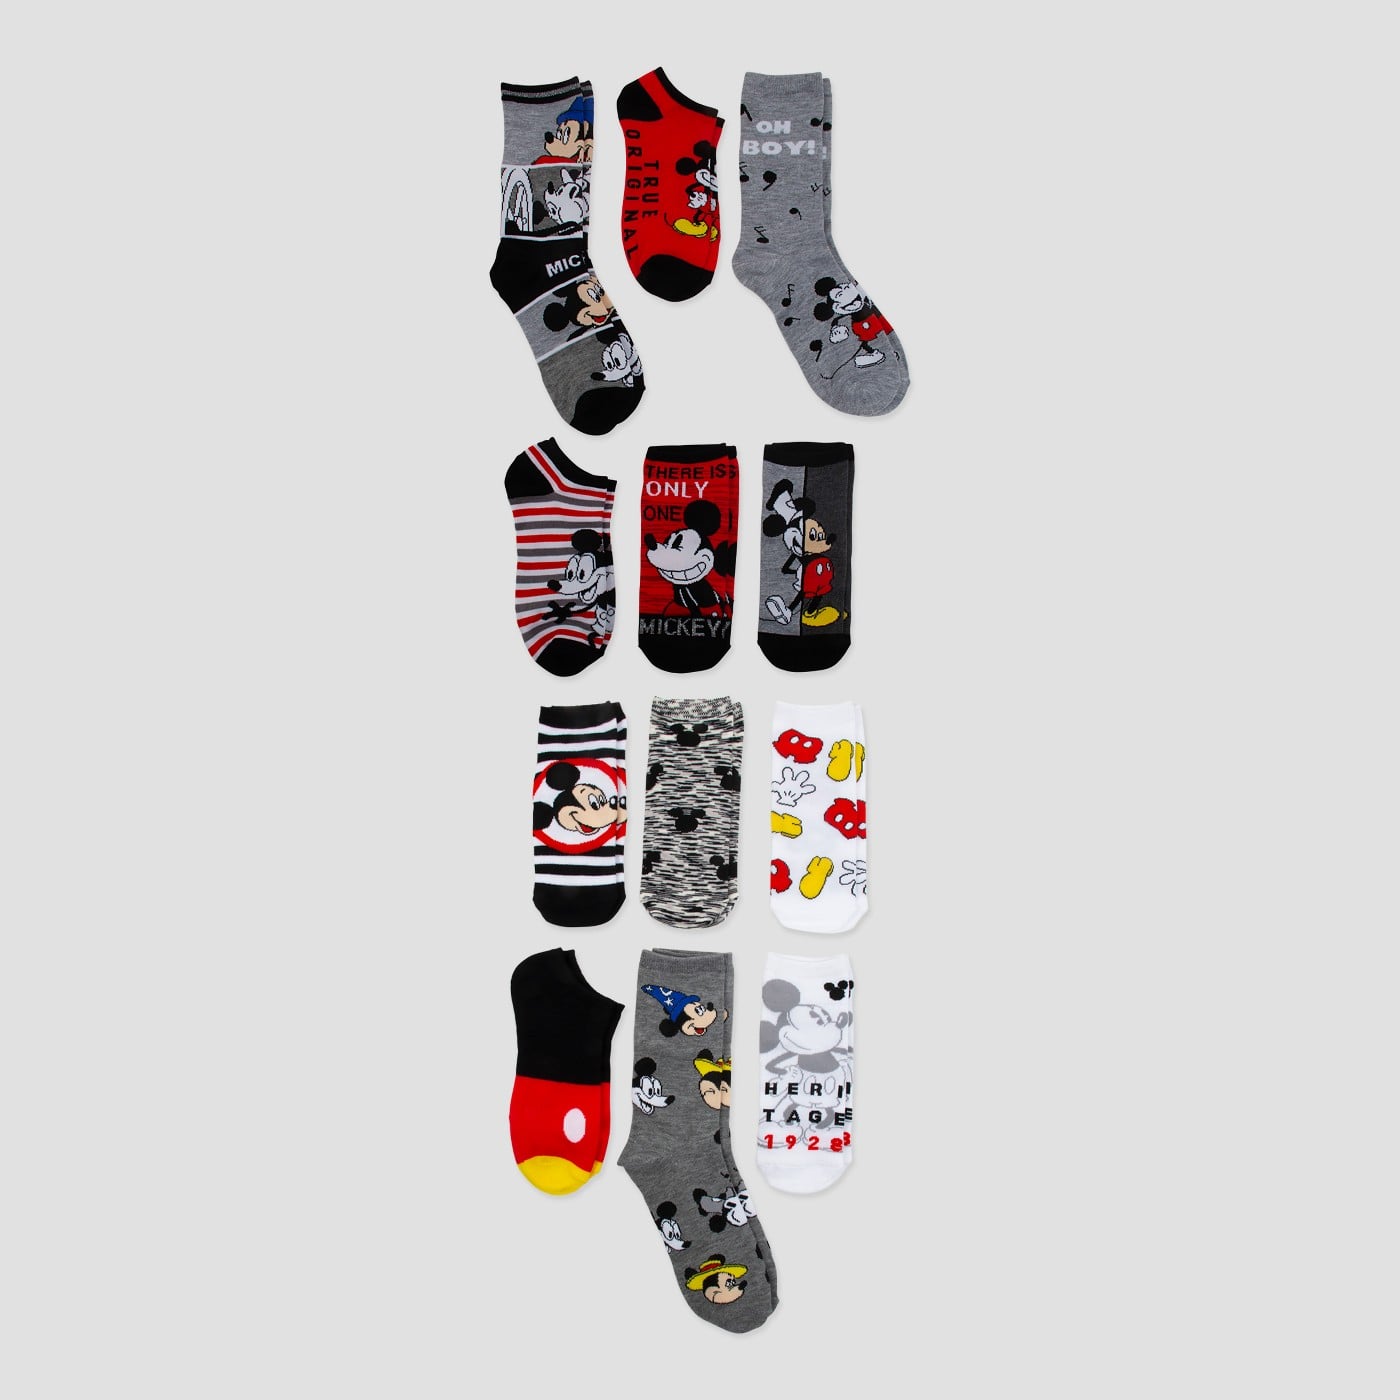 Here Are All the Fun Socks Fans Can Expect, Target's $15 Mickey Mouse Sock  Advent Calendar Is a Disney Fan's Dream Come True